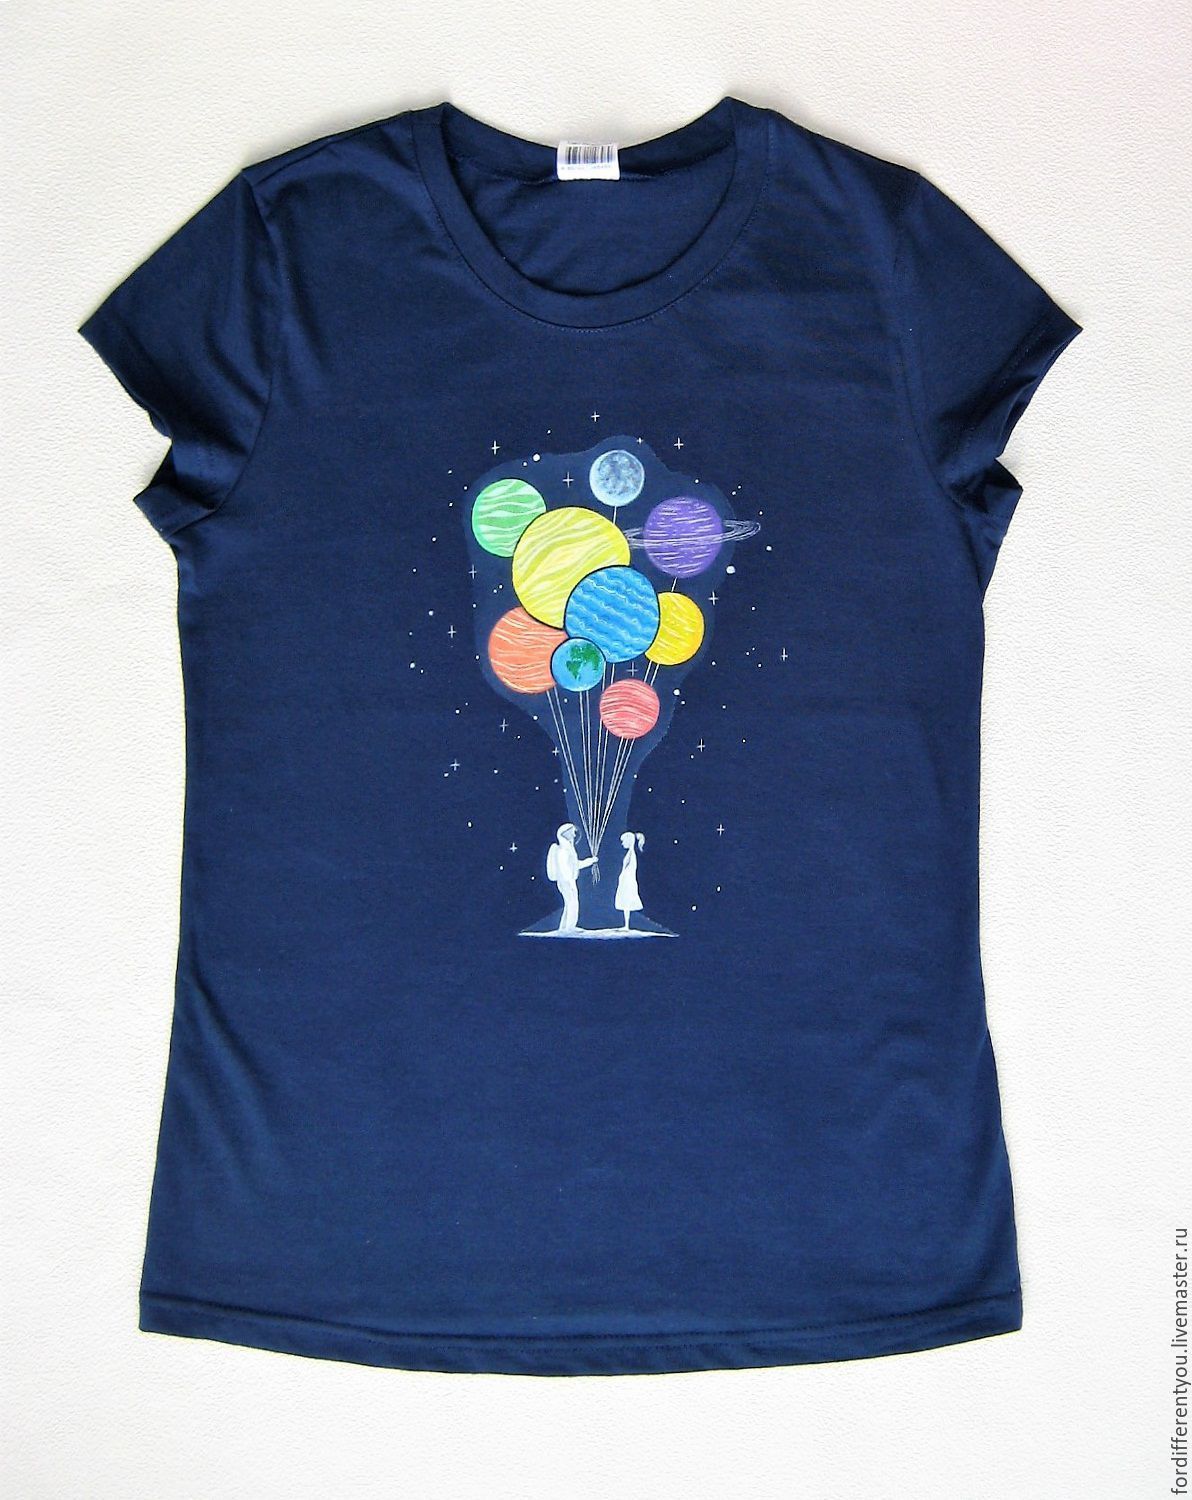 To purchase a t-shirt, t-shirt,t-shirt,cool t-shirt, gift,unusual gift,gift for girls
